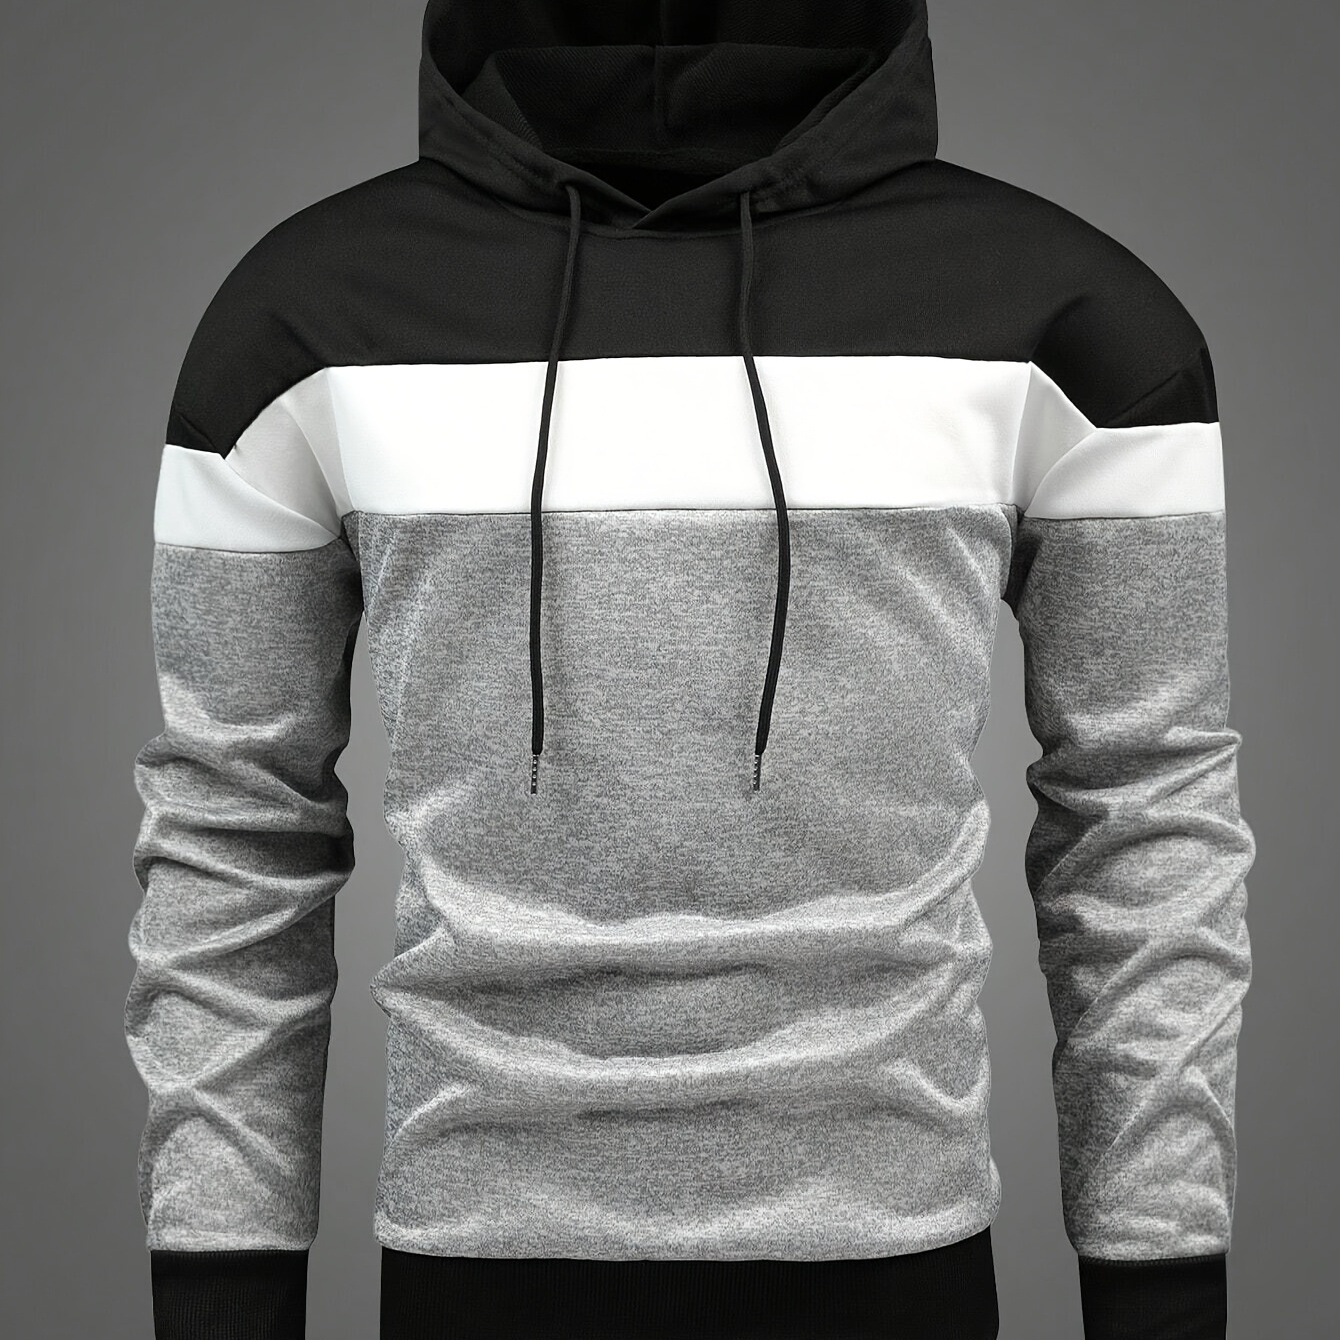 

Men's Color Blocked Hooded Sweatshirt With Drawstring, Men's Pullover Tops For Spring Autumn